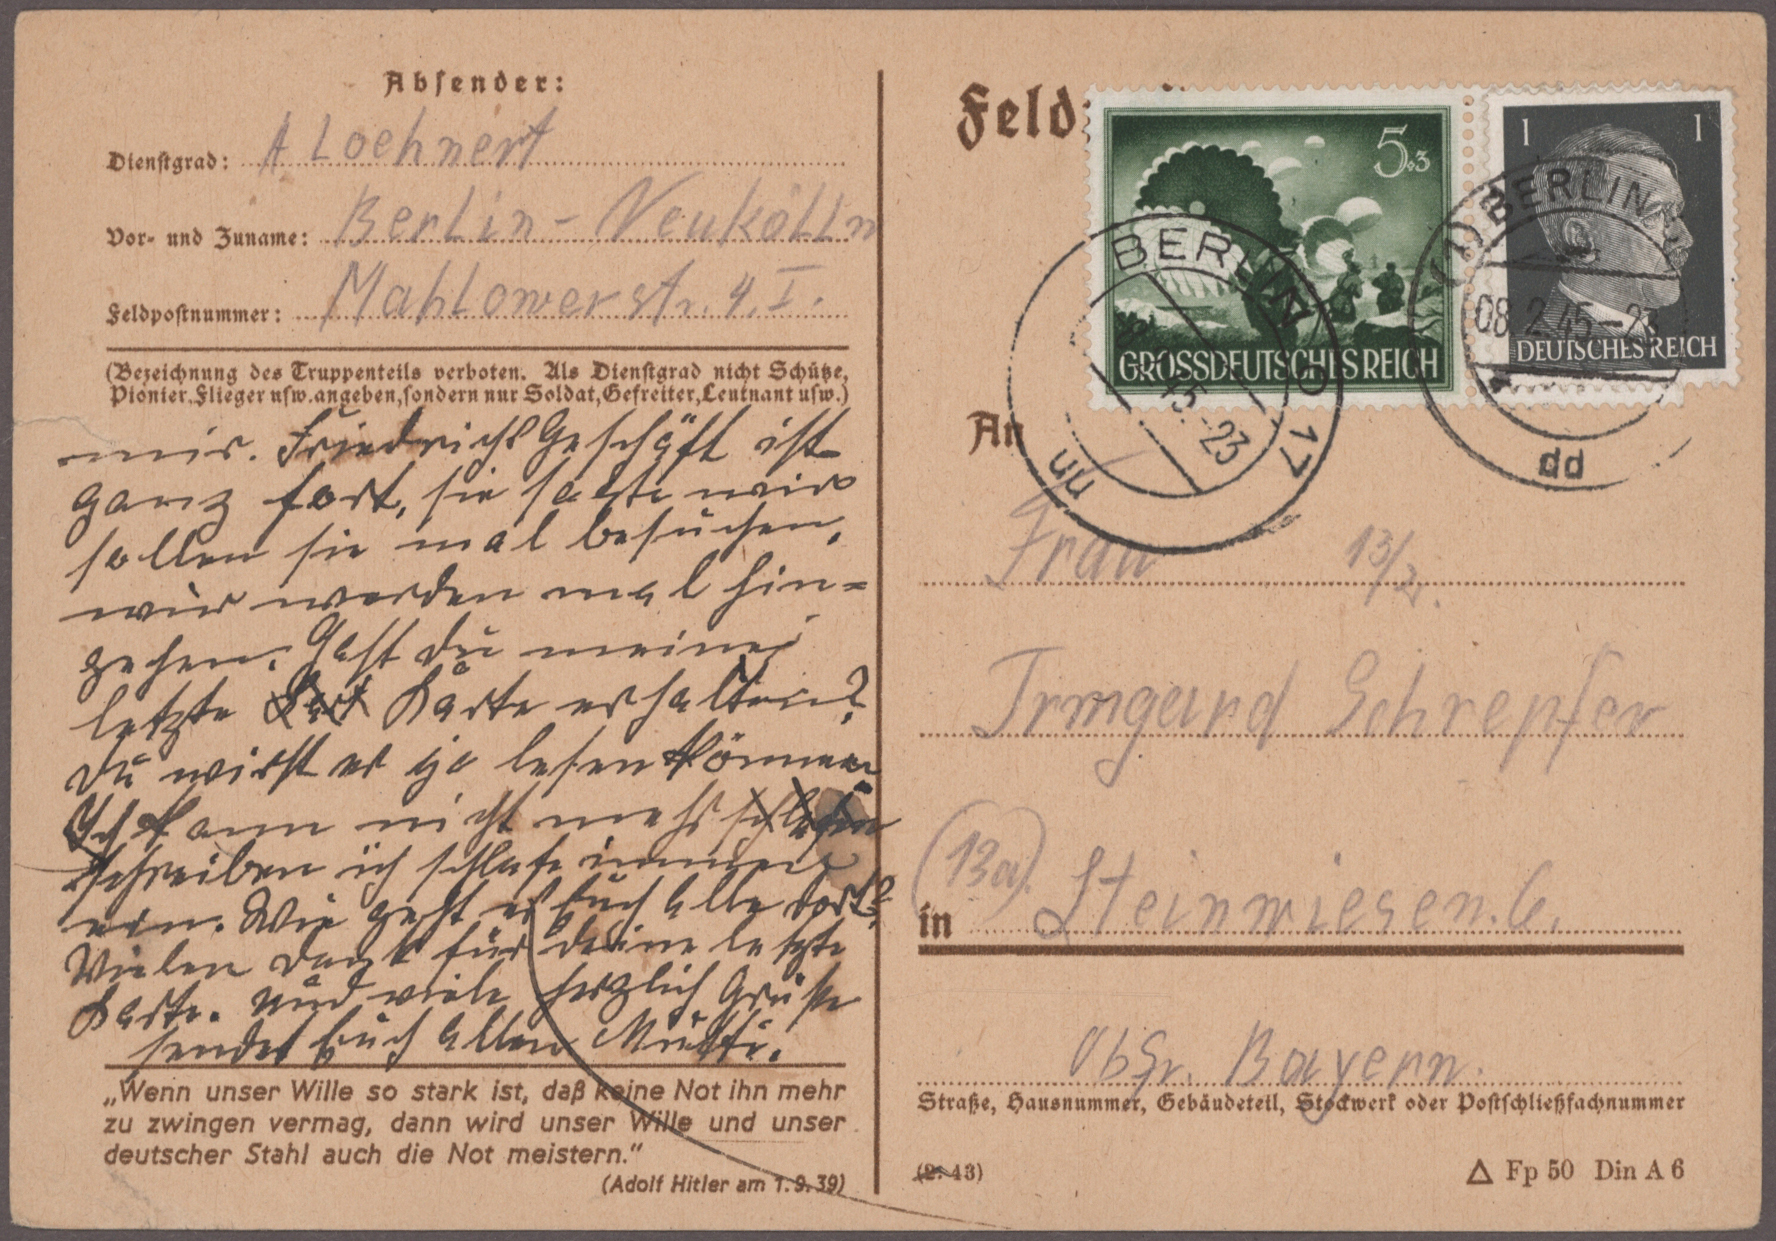 Lot 08741 - Deutsches Reich - 3. Reich  -  Auktionshaus Christoph Gärtner GmbH & Co. KG 53rd AUCTION - Day 5, Collections Estates, Germany, Picture Postcards